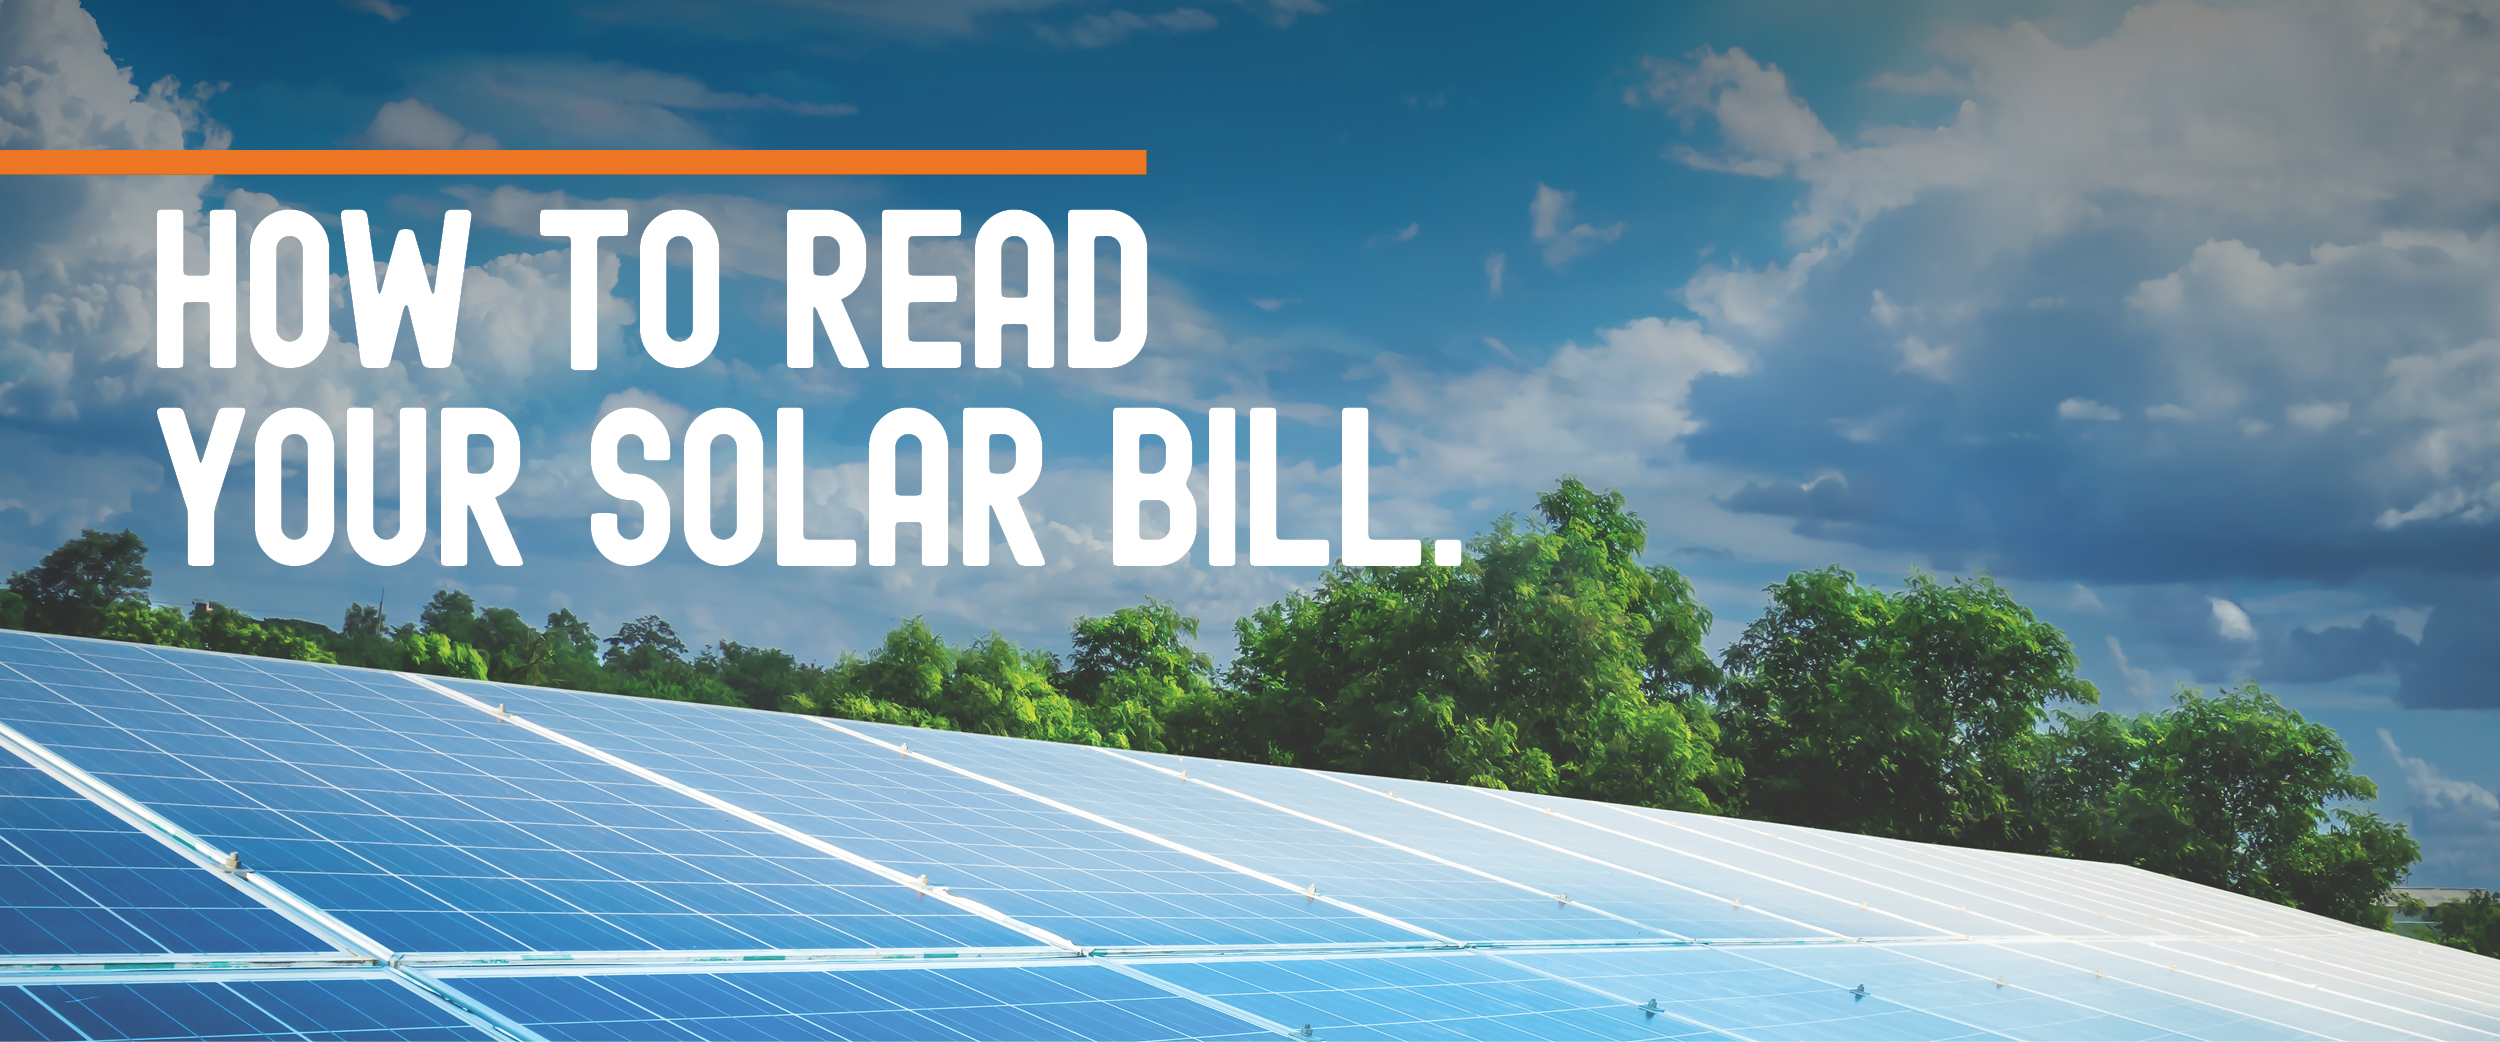 How To Read Your Solar Bill Black Hills Energy